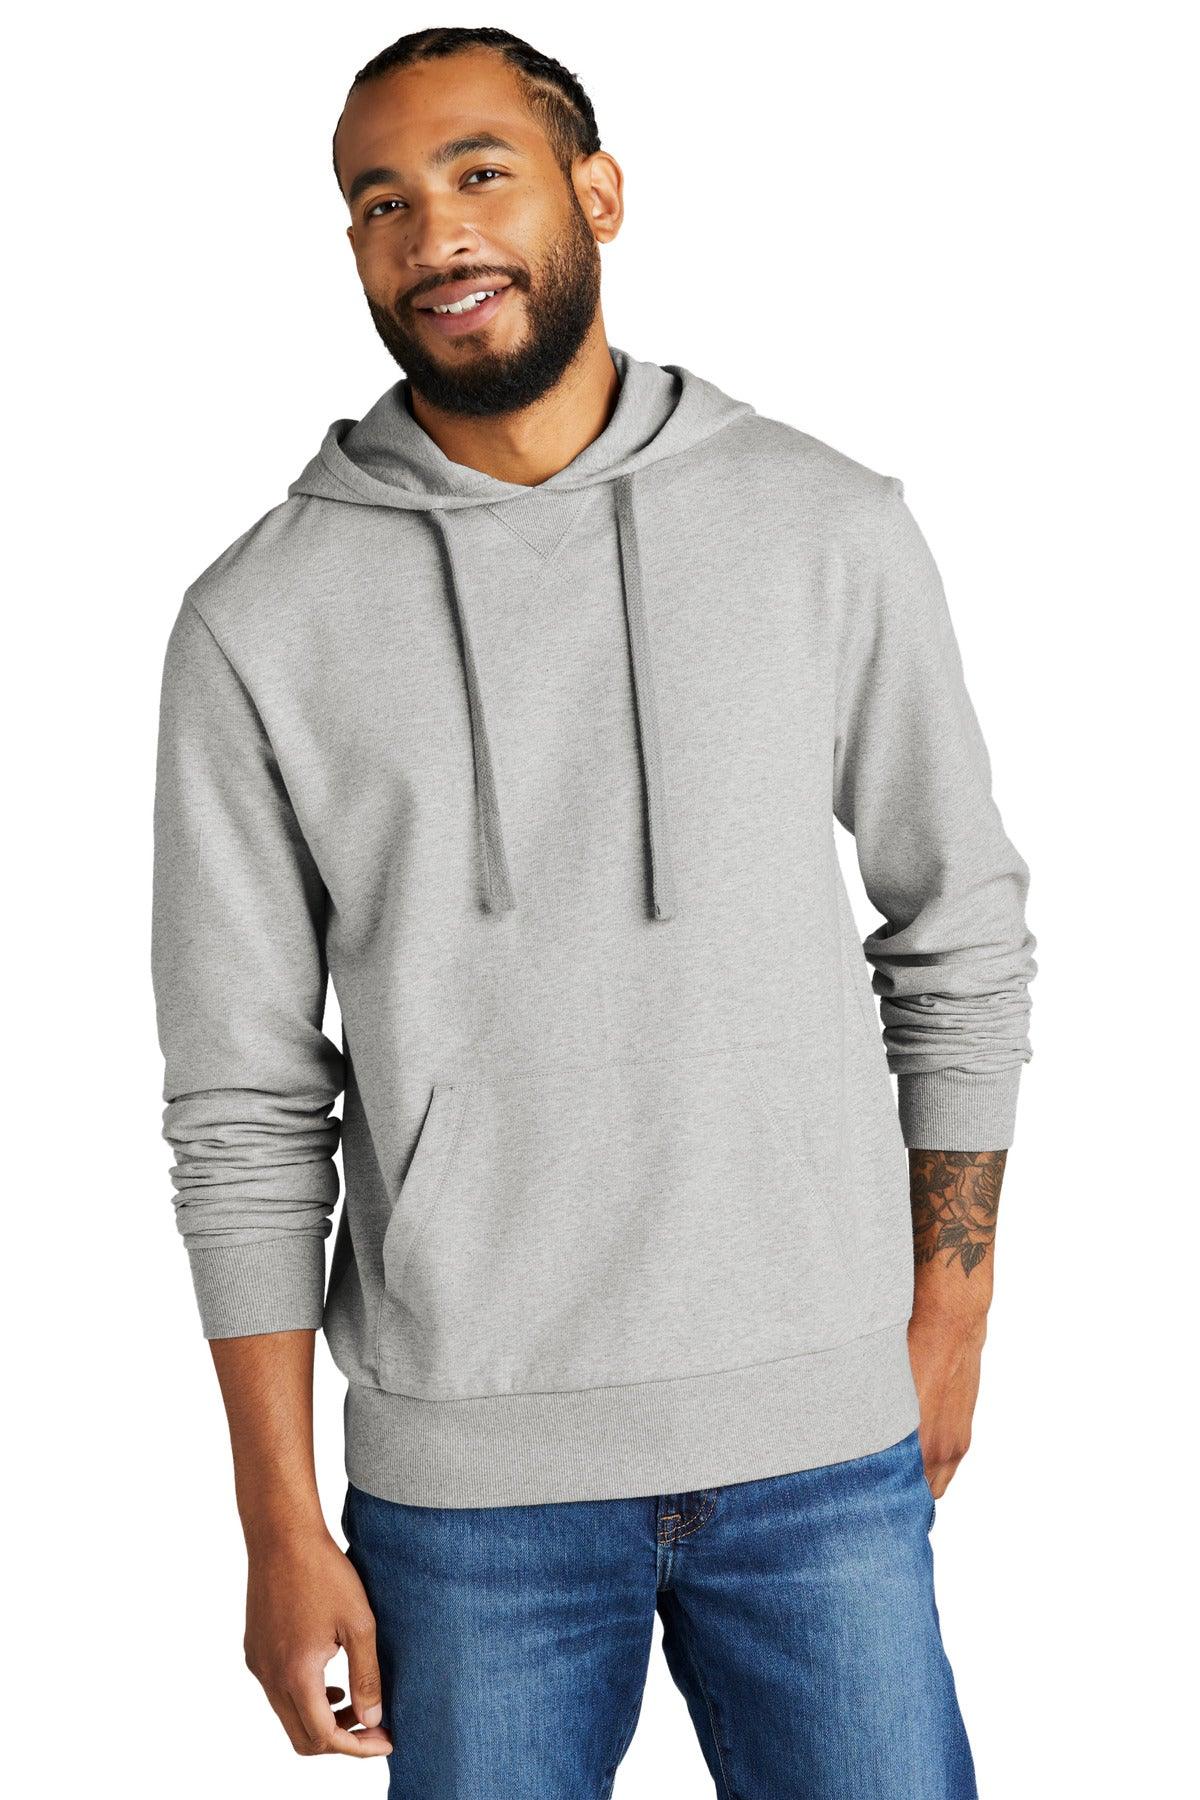 Allmade Unisex Organic French Terry Pullover Hoodie AL4000 - Dresses Max